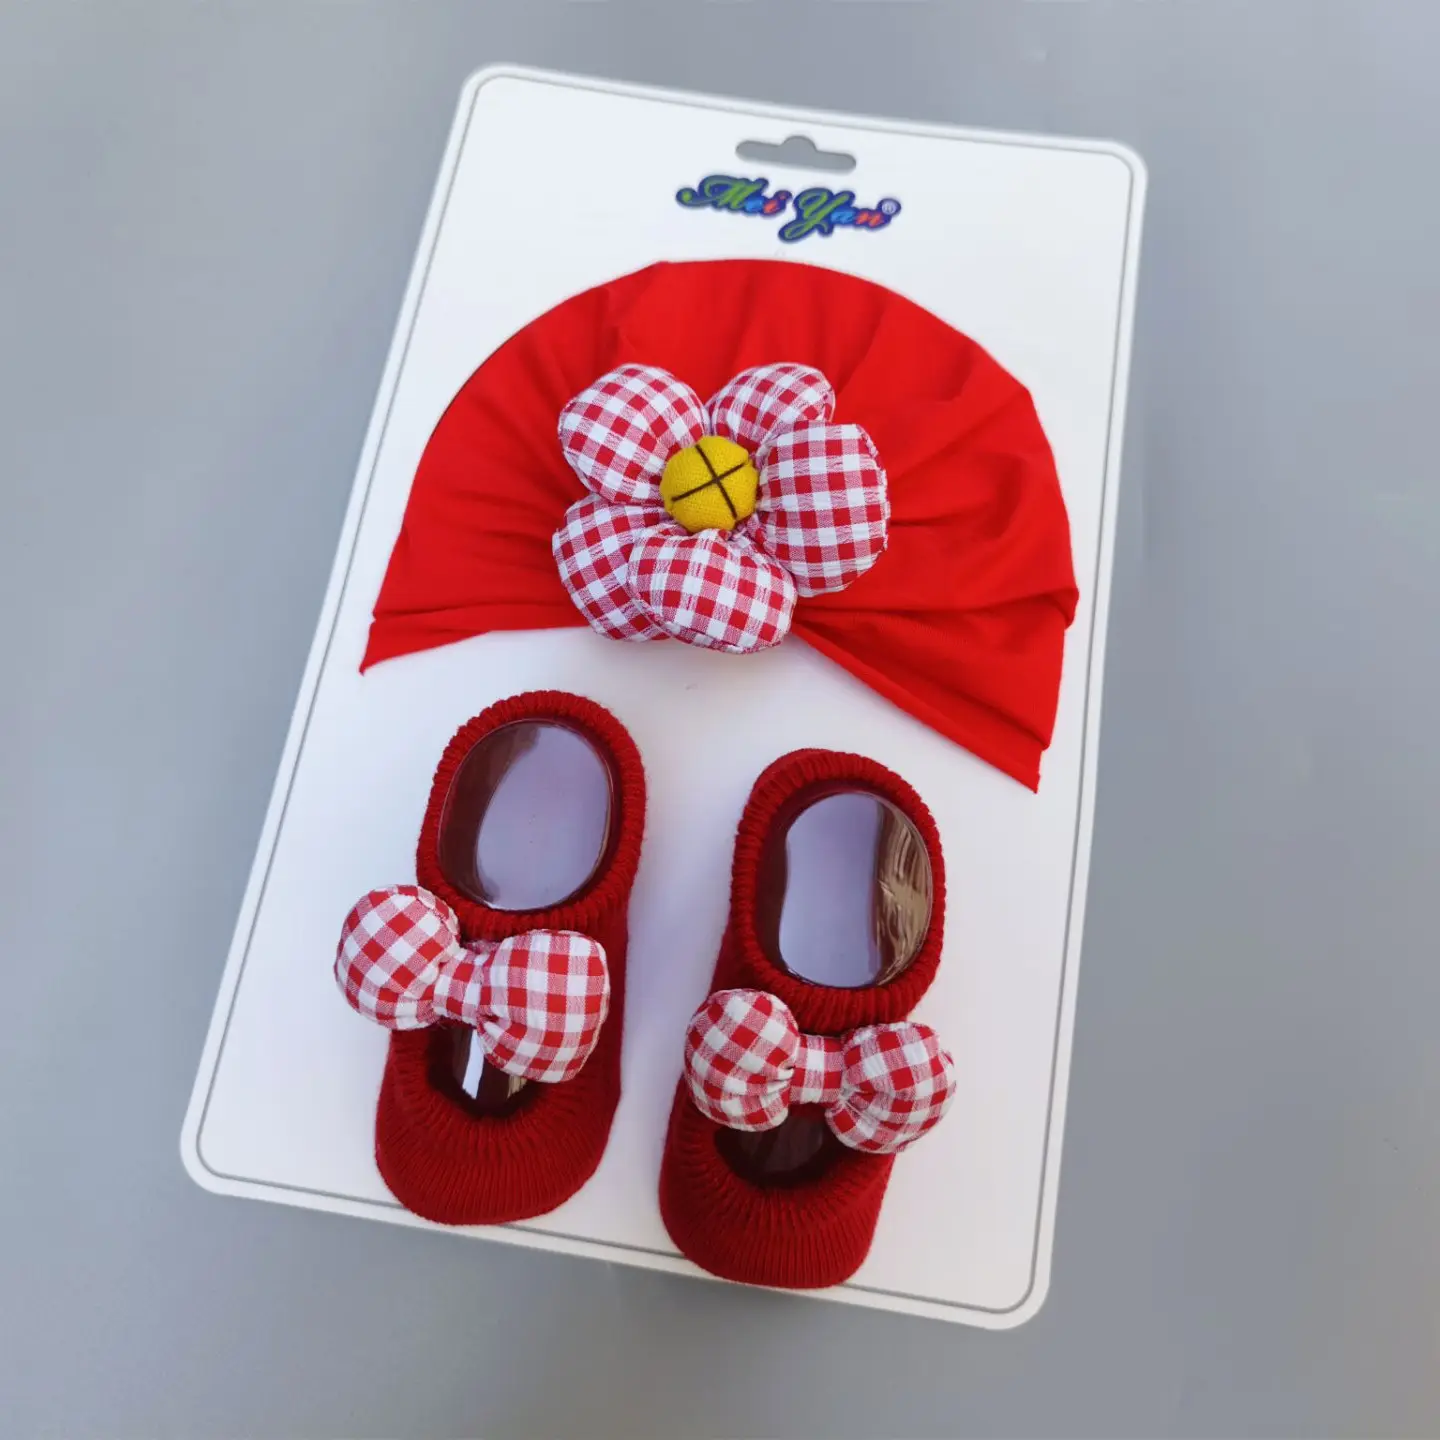 New Style High Quality Coton Cute Infant Toddler Gift Caps Newborn Baby Caps And Socks Set